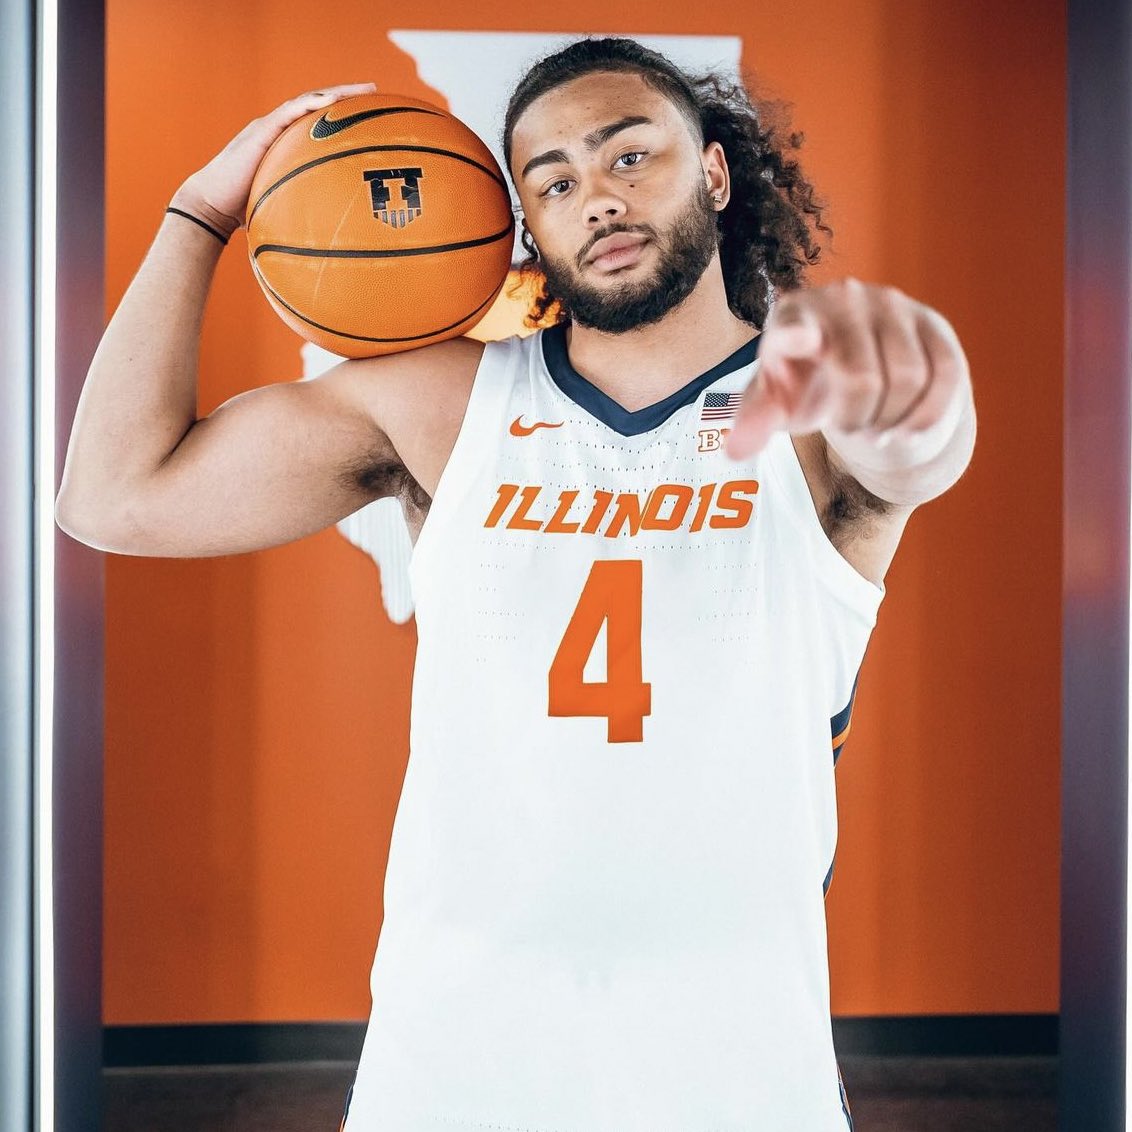 Champaign+native+Kylan+Boswell+poses+with+a+basketball+for+promotional+photos+with+Illini+Athletics.